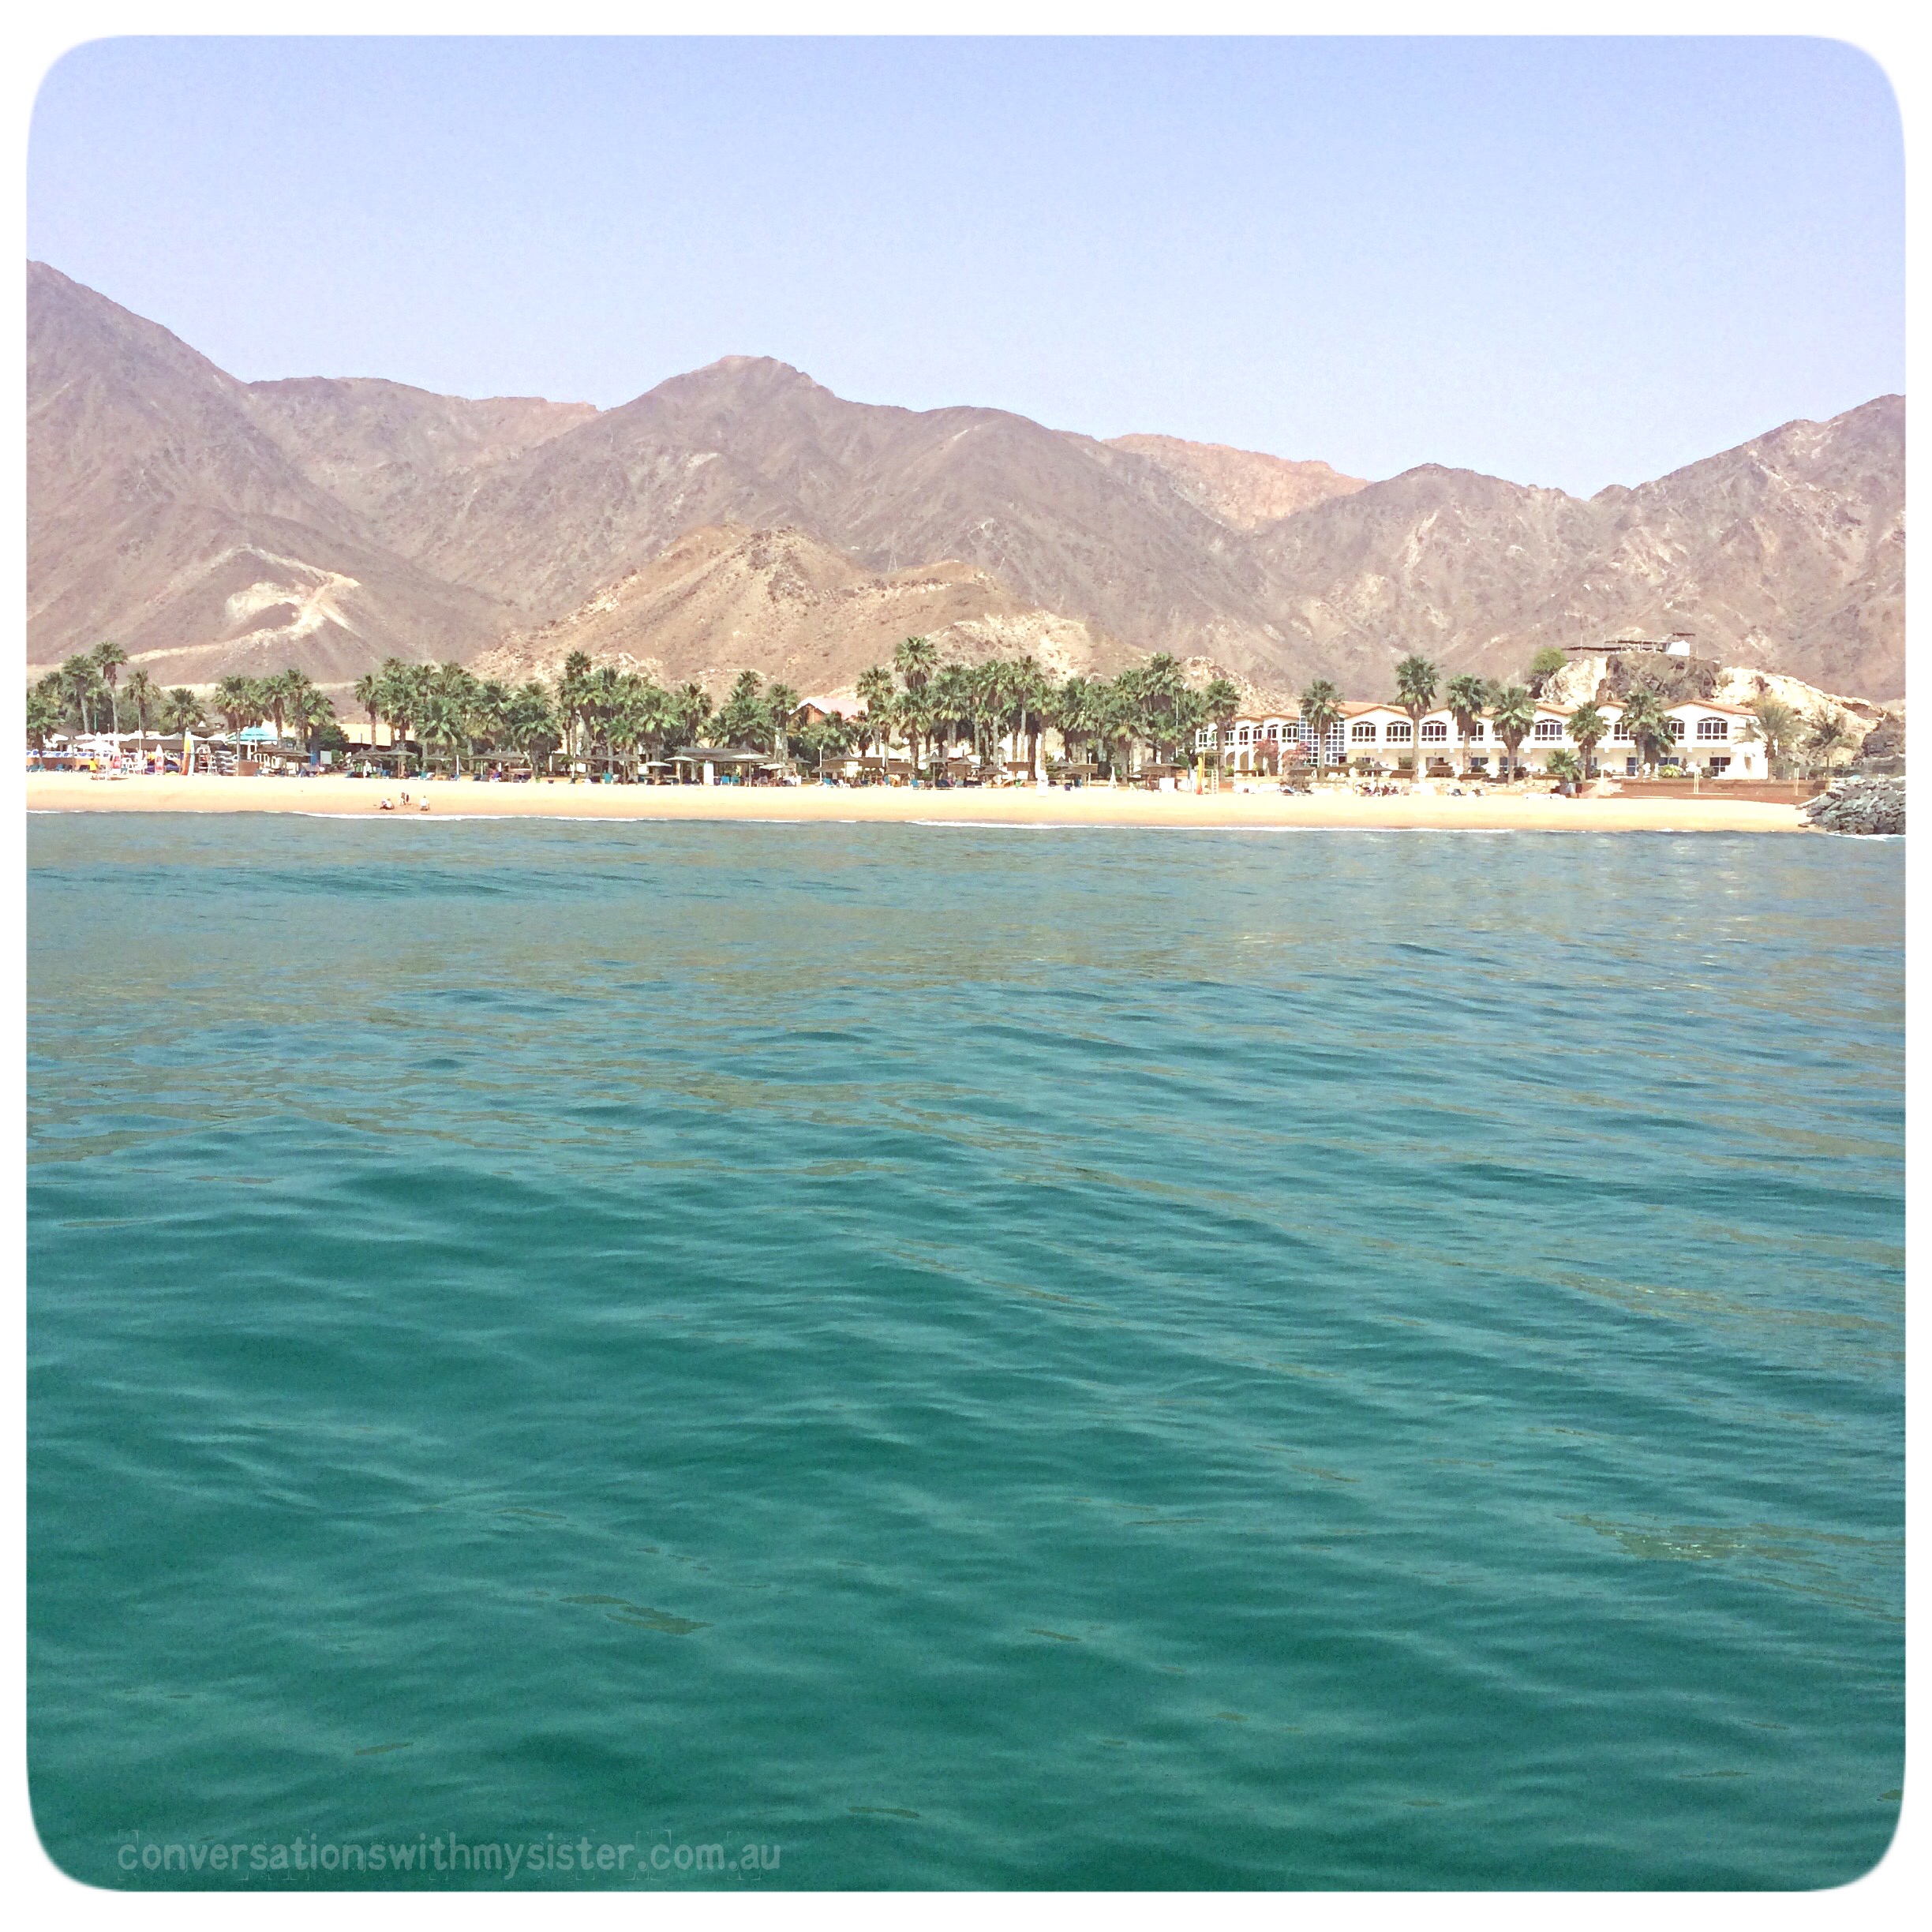 Visiting Fujairah means enjoying a broad range of activities. From snorkelling to visiting historic buildings - including the UAE's oldest & quaint mosque.